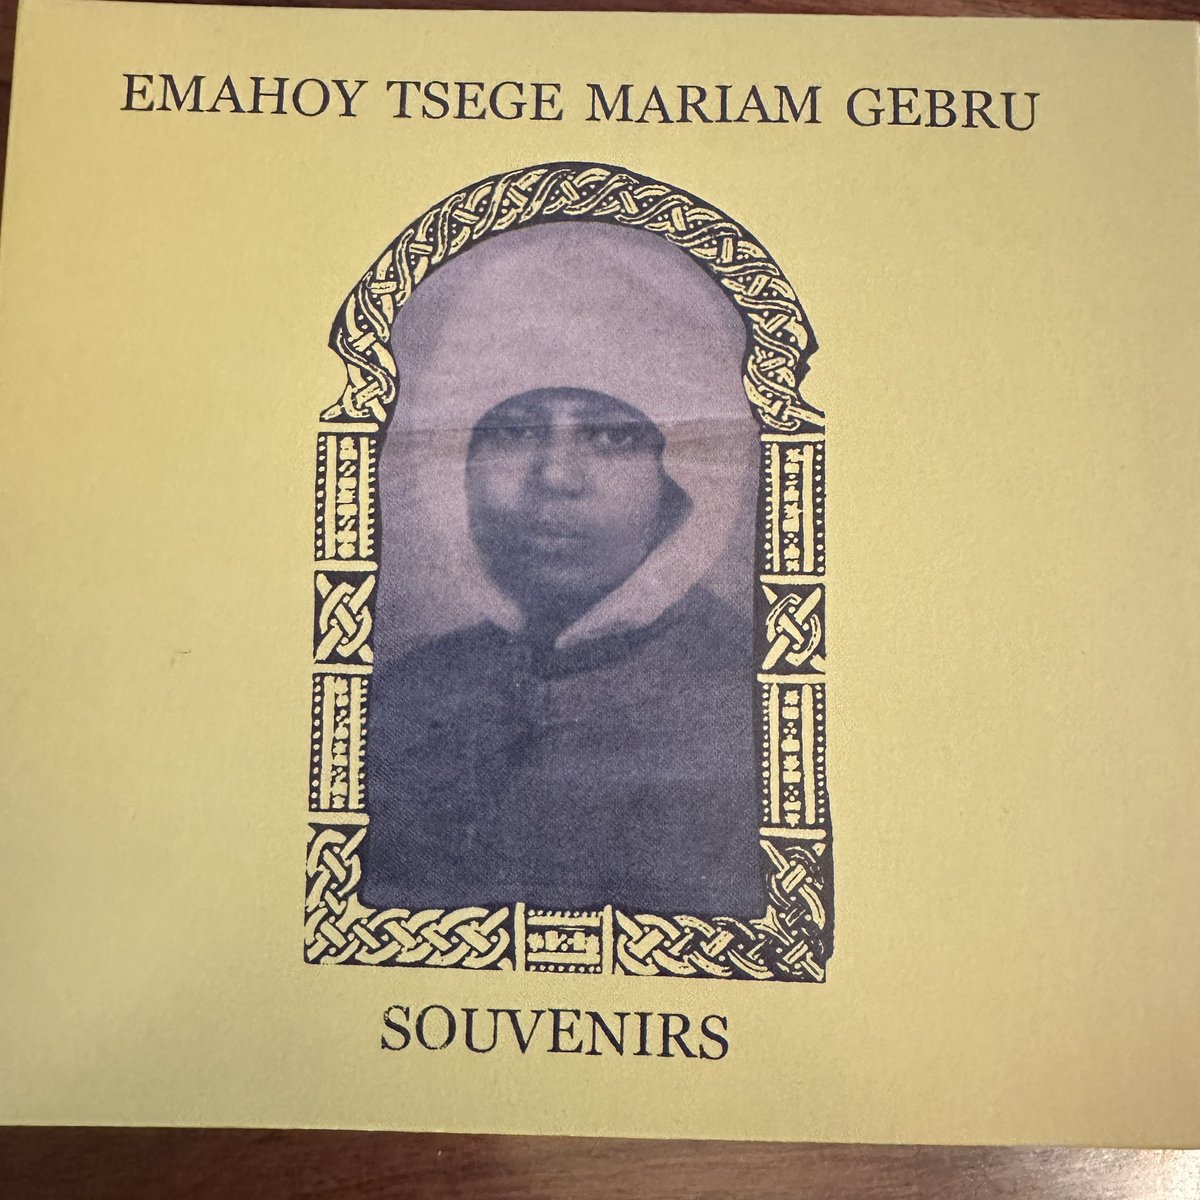 I don’t really understand how this lofi recording of Amharic language piano music played by a nun captivates me so, but I do love it.